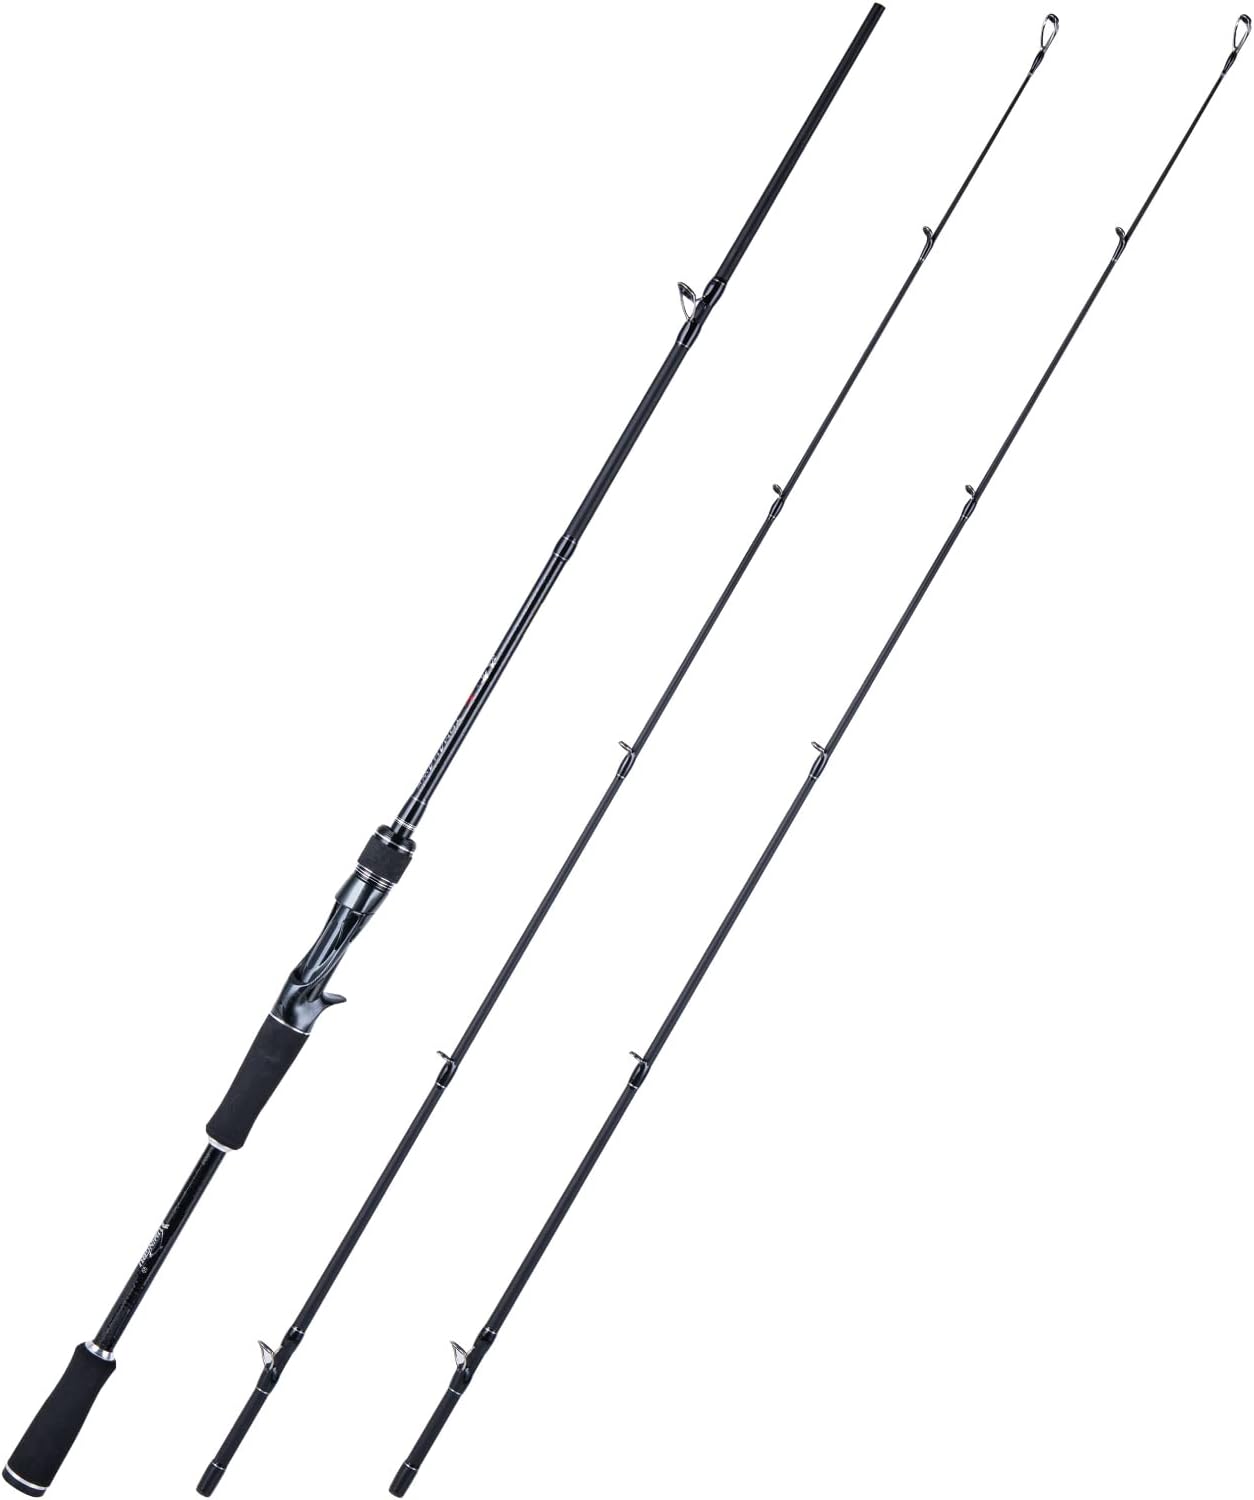 Goture Portable Travel Fishing Rod - 1 Piece/2 Piece/3 Piece Fishing Pole with Bag, Ultralight Telescopic Fishing Rod/Twin Tip Spinning and Casting Rod/Baitcaster Rod for Crappie Bass Trout Fishing